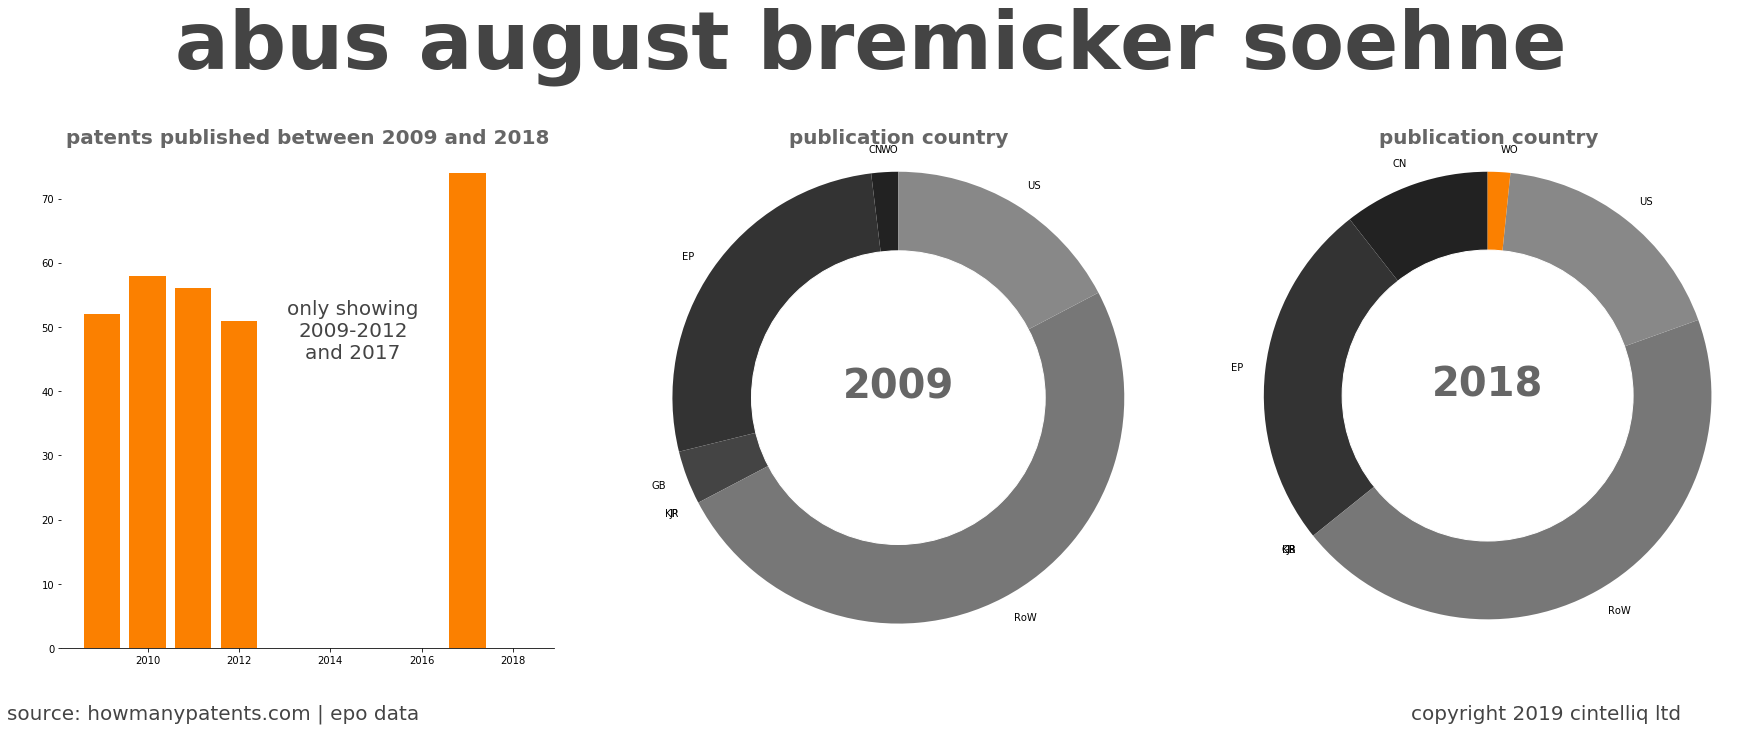 summary of patents for Abus August Bremicker Soehne